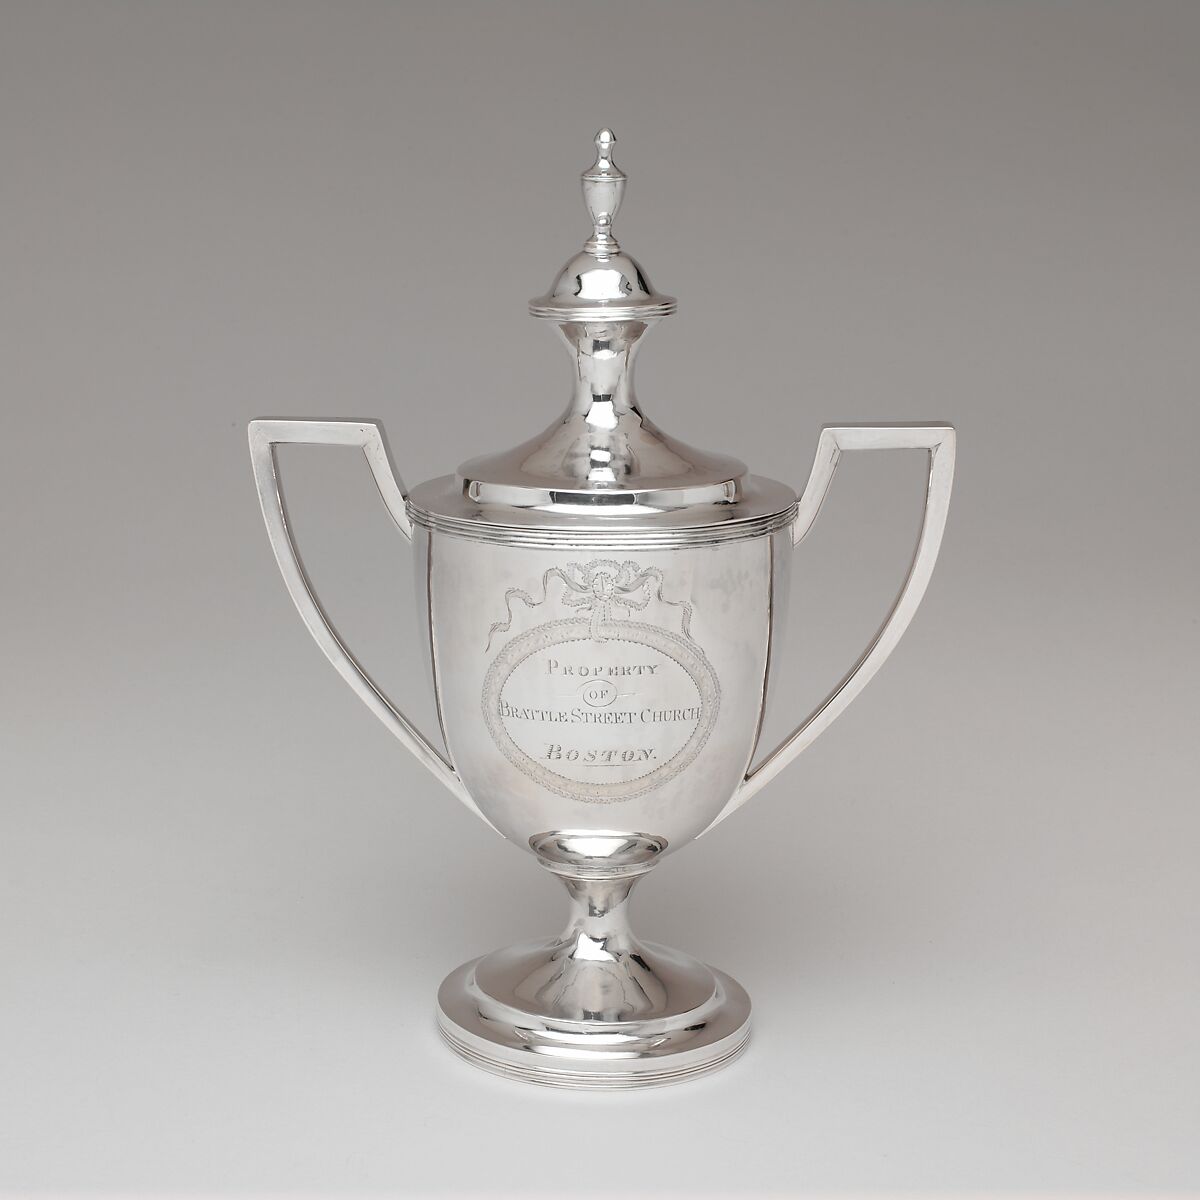 Two-handled Cup, Joseph Loring (1743–1815), Silver, American 